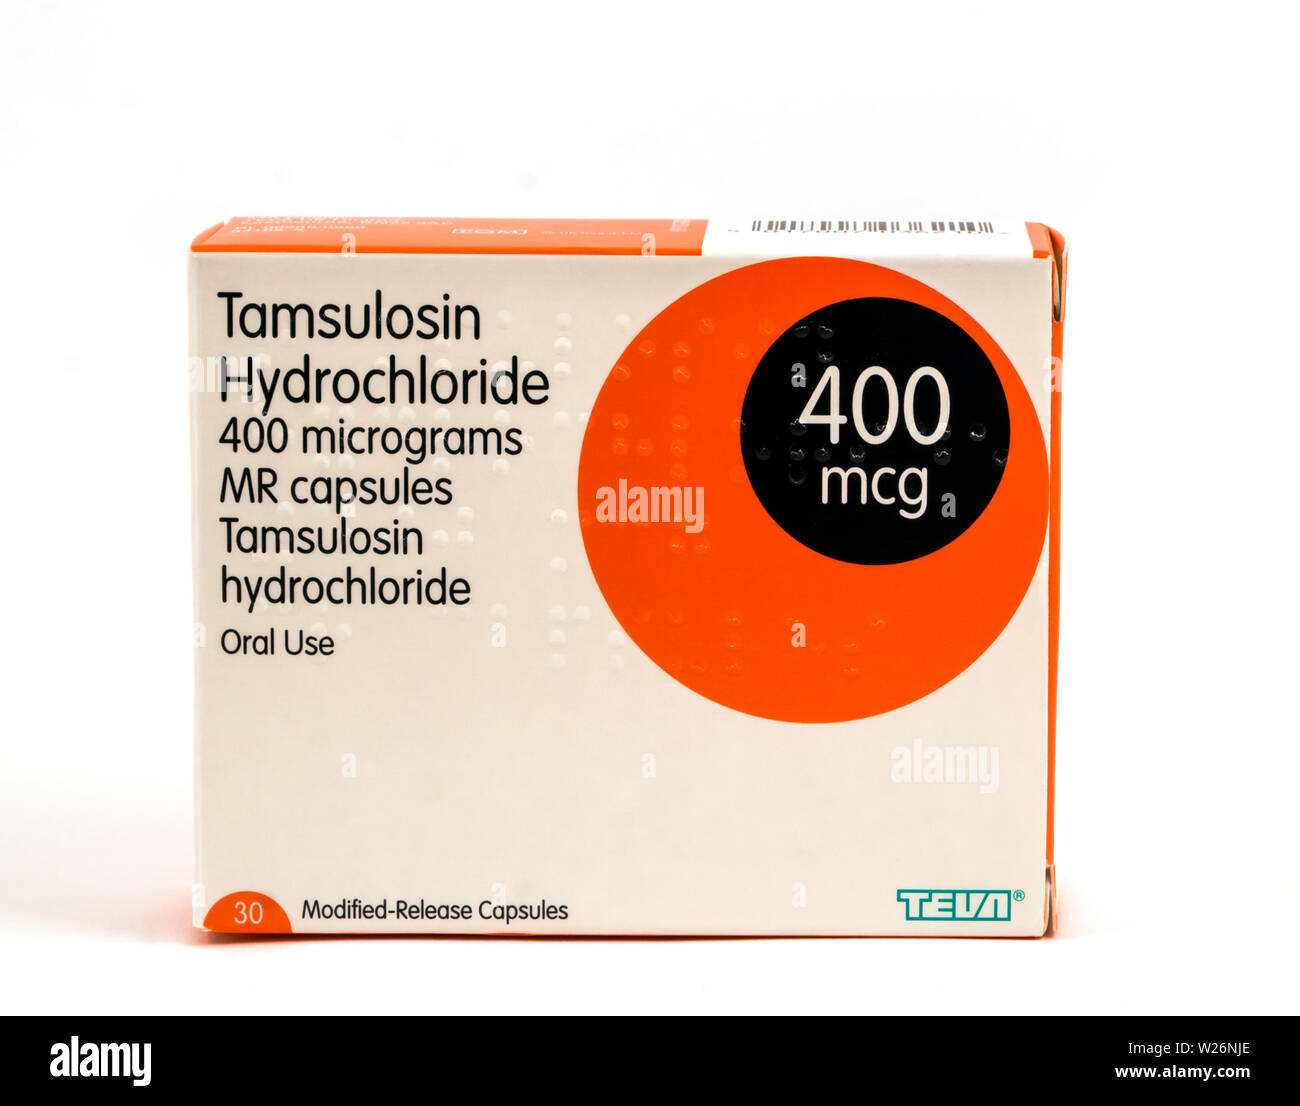 tamsulosin hydrochloride, an alpha-blocker used to treat the symptoms of a prostate gland condition called BPH (benign prostatic hyperplasia). Stock Photo